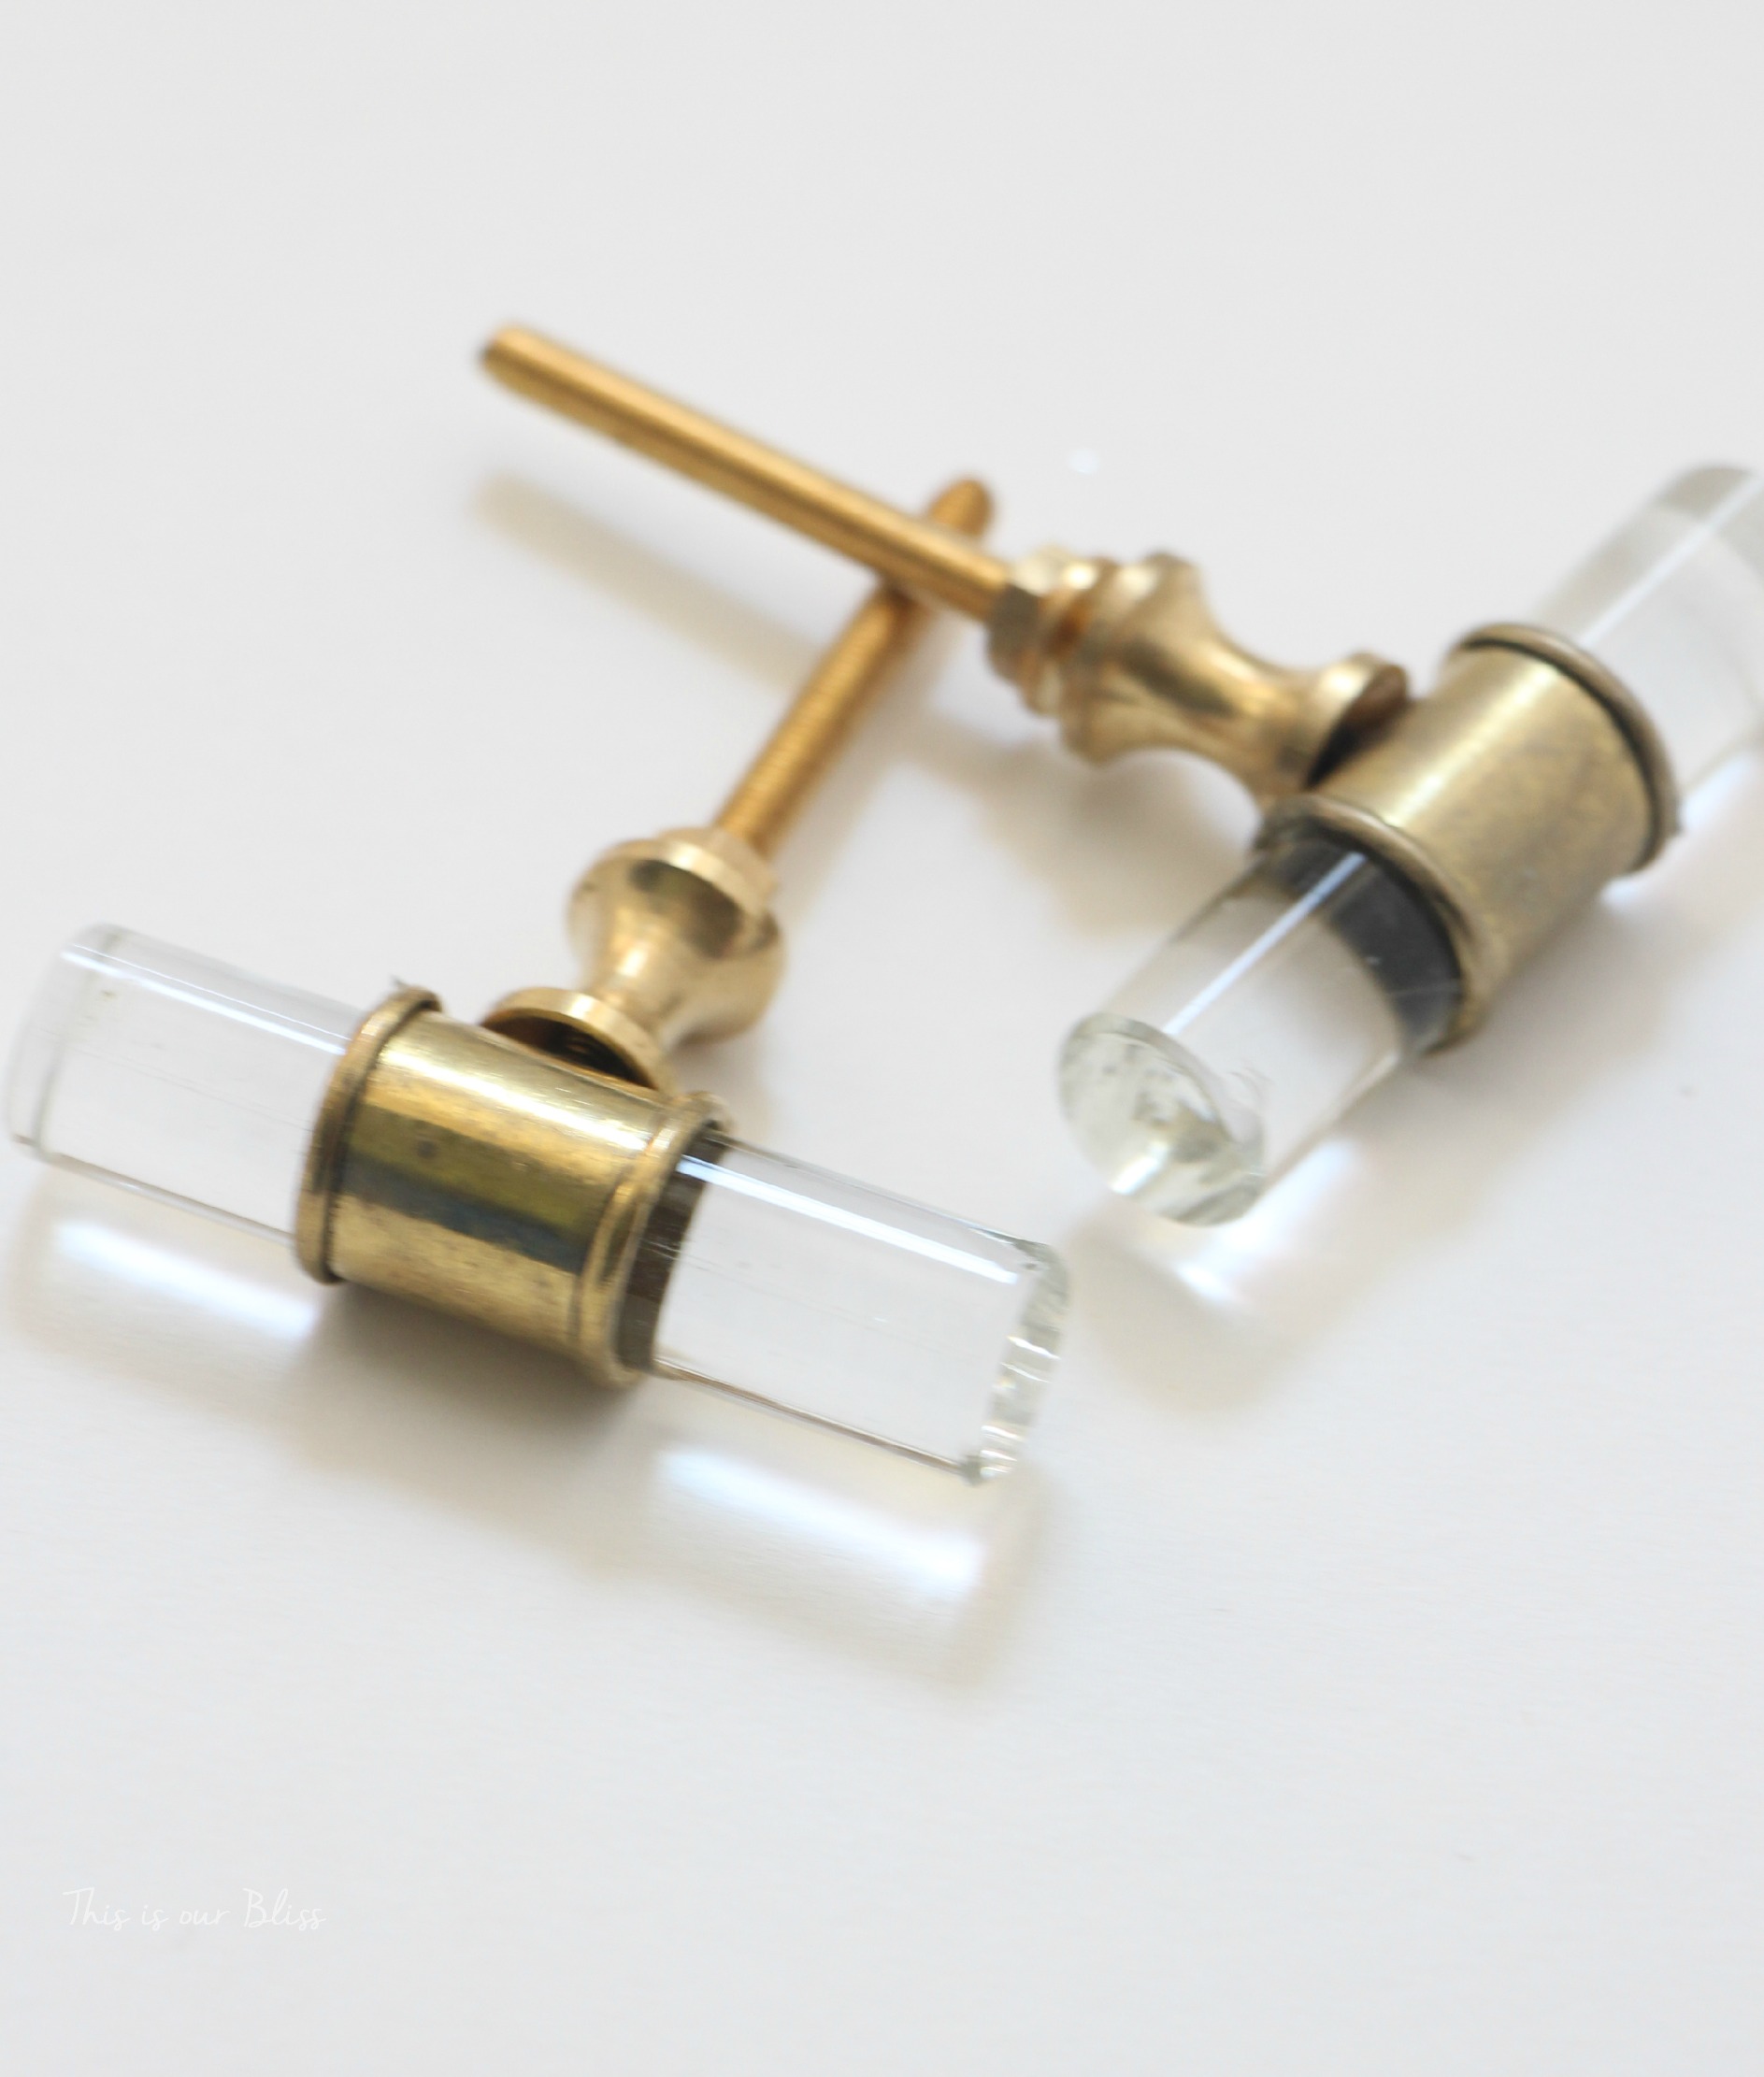 Acrylic Brass Knobs Bathroom Vanity Hardware This Is Our Bliss 